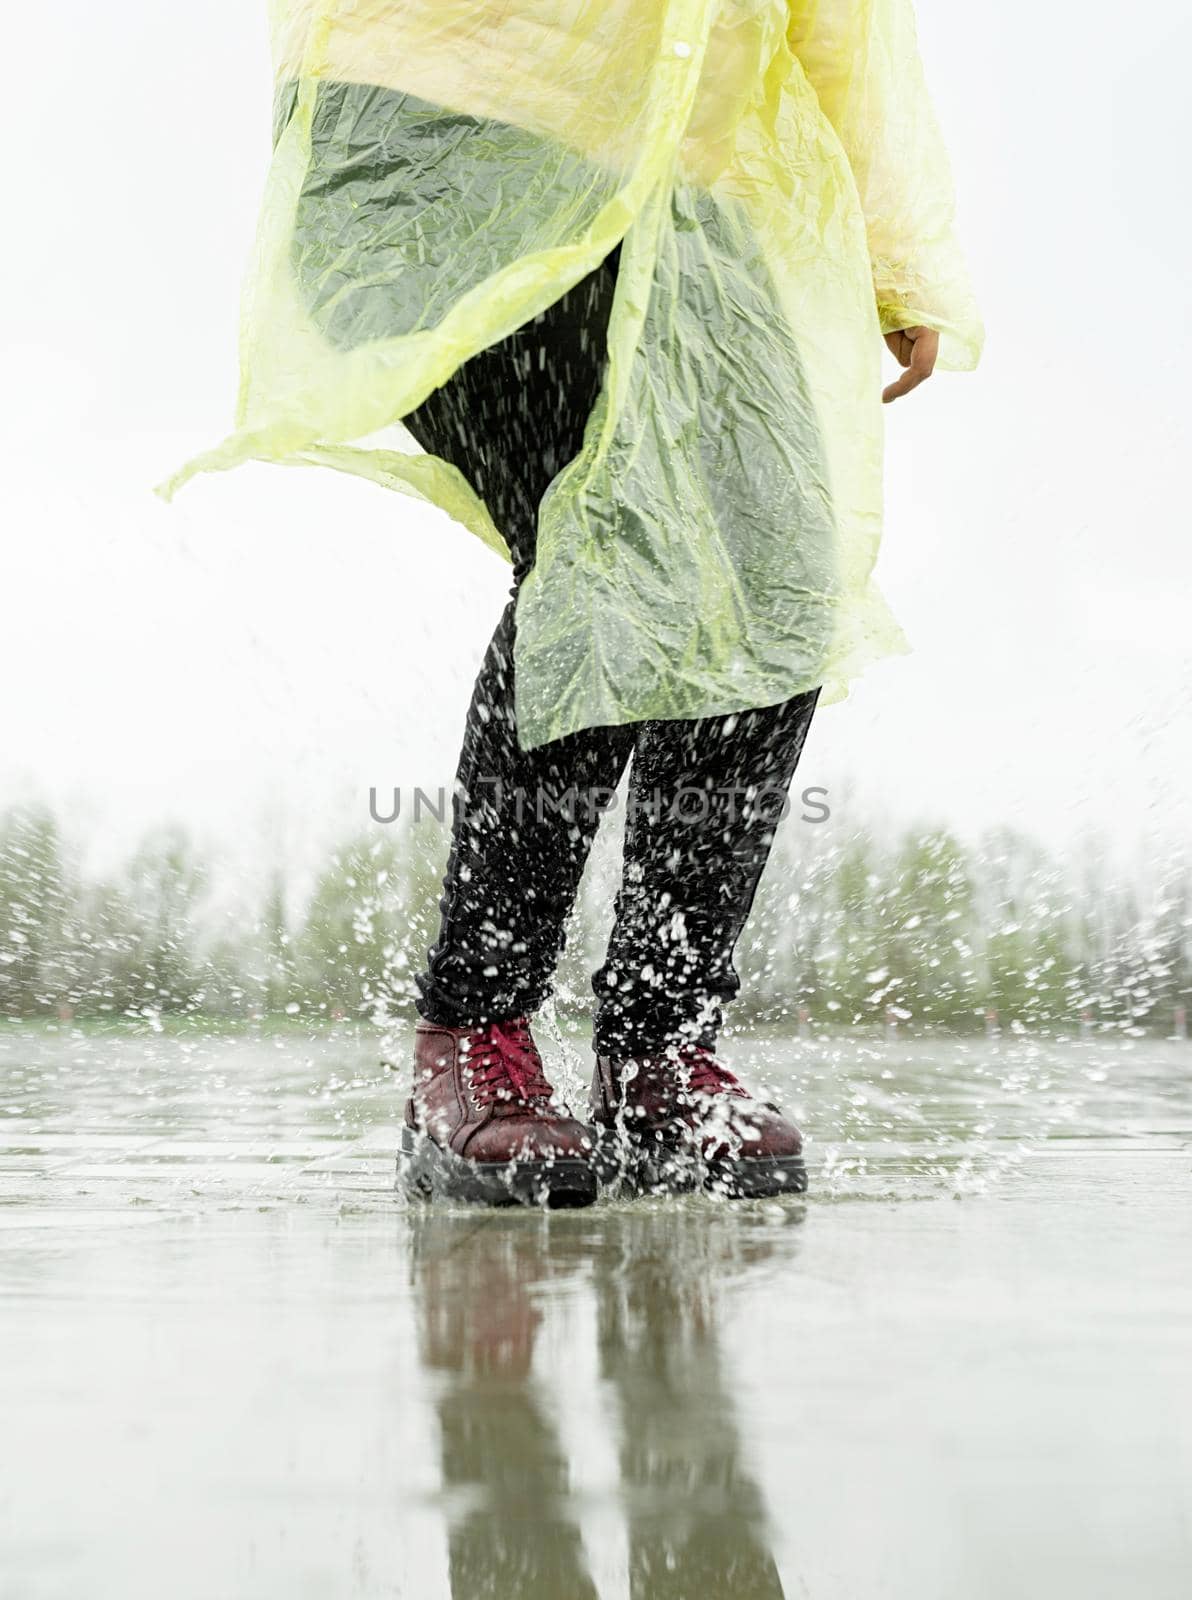 woman running on asphalt in rainy weather. Close up of legs and shoes splashing in puddles.